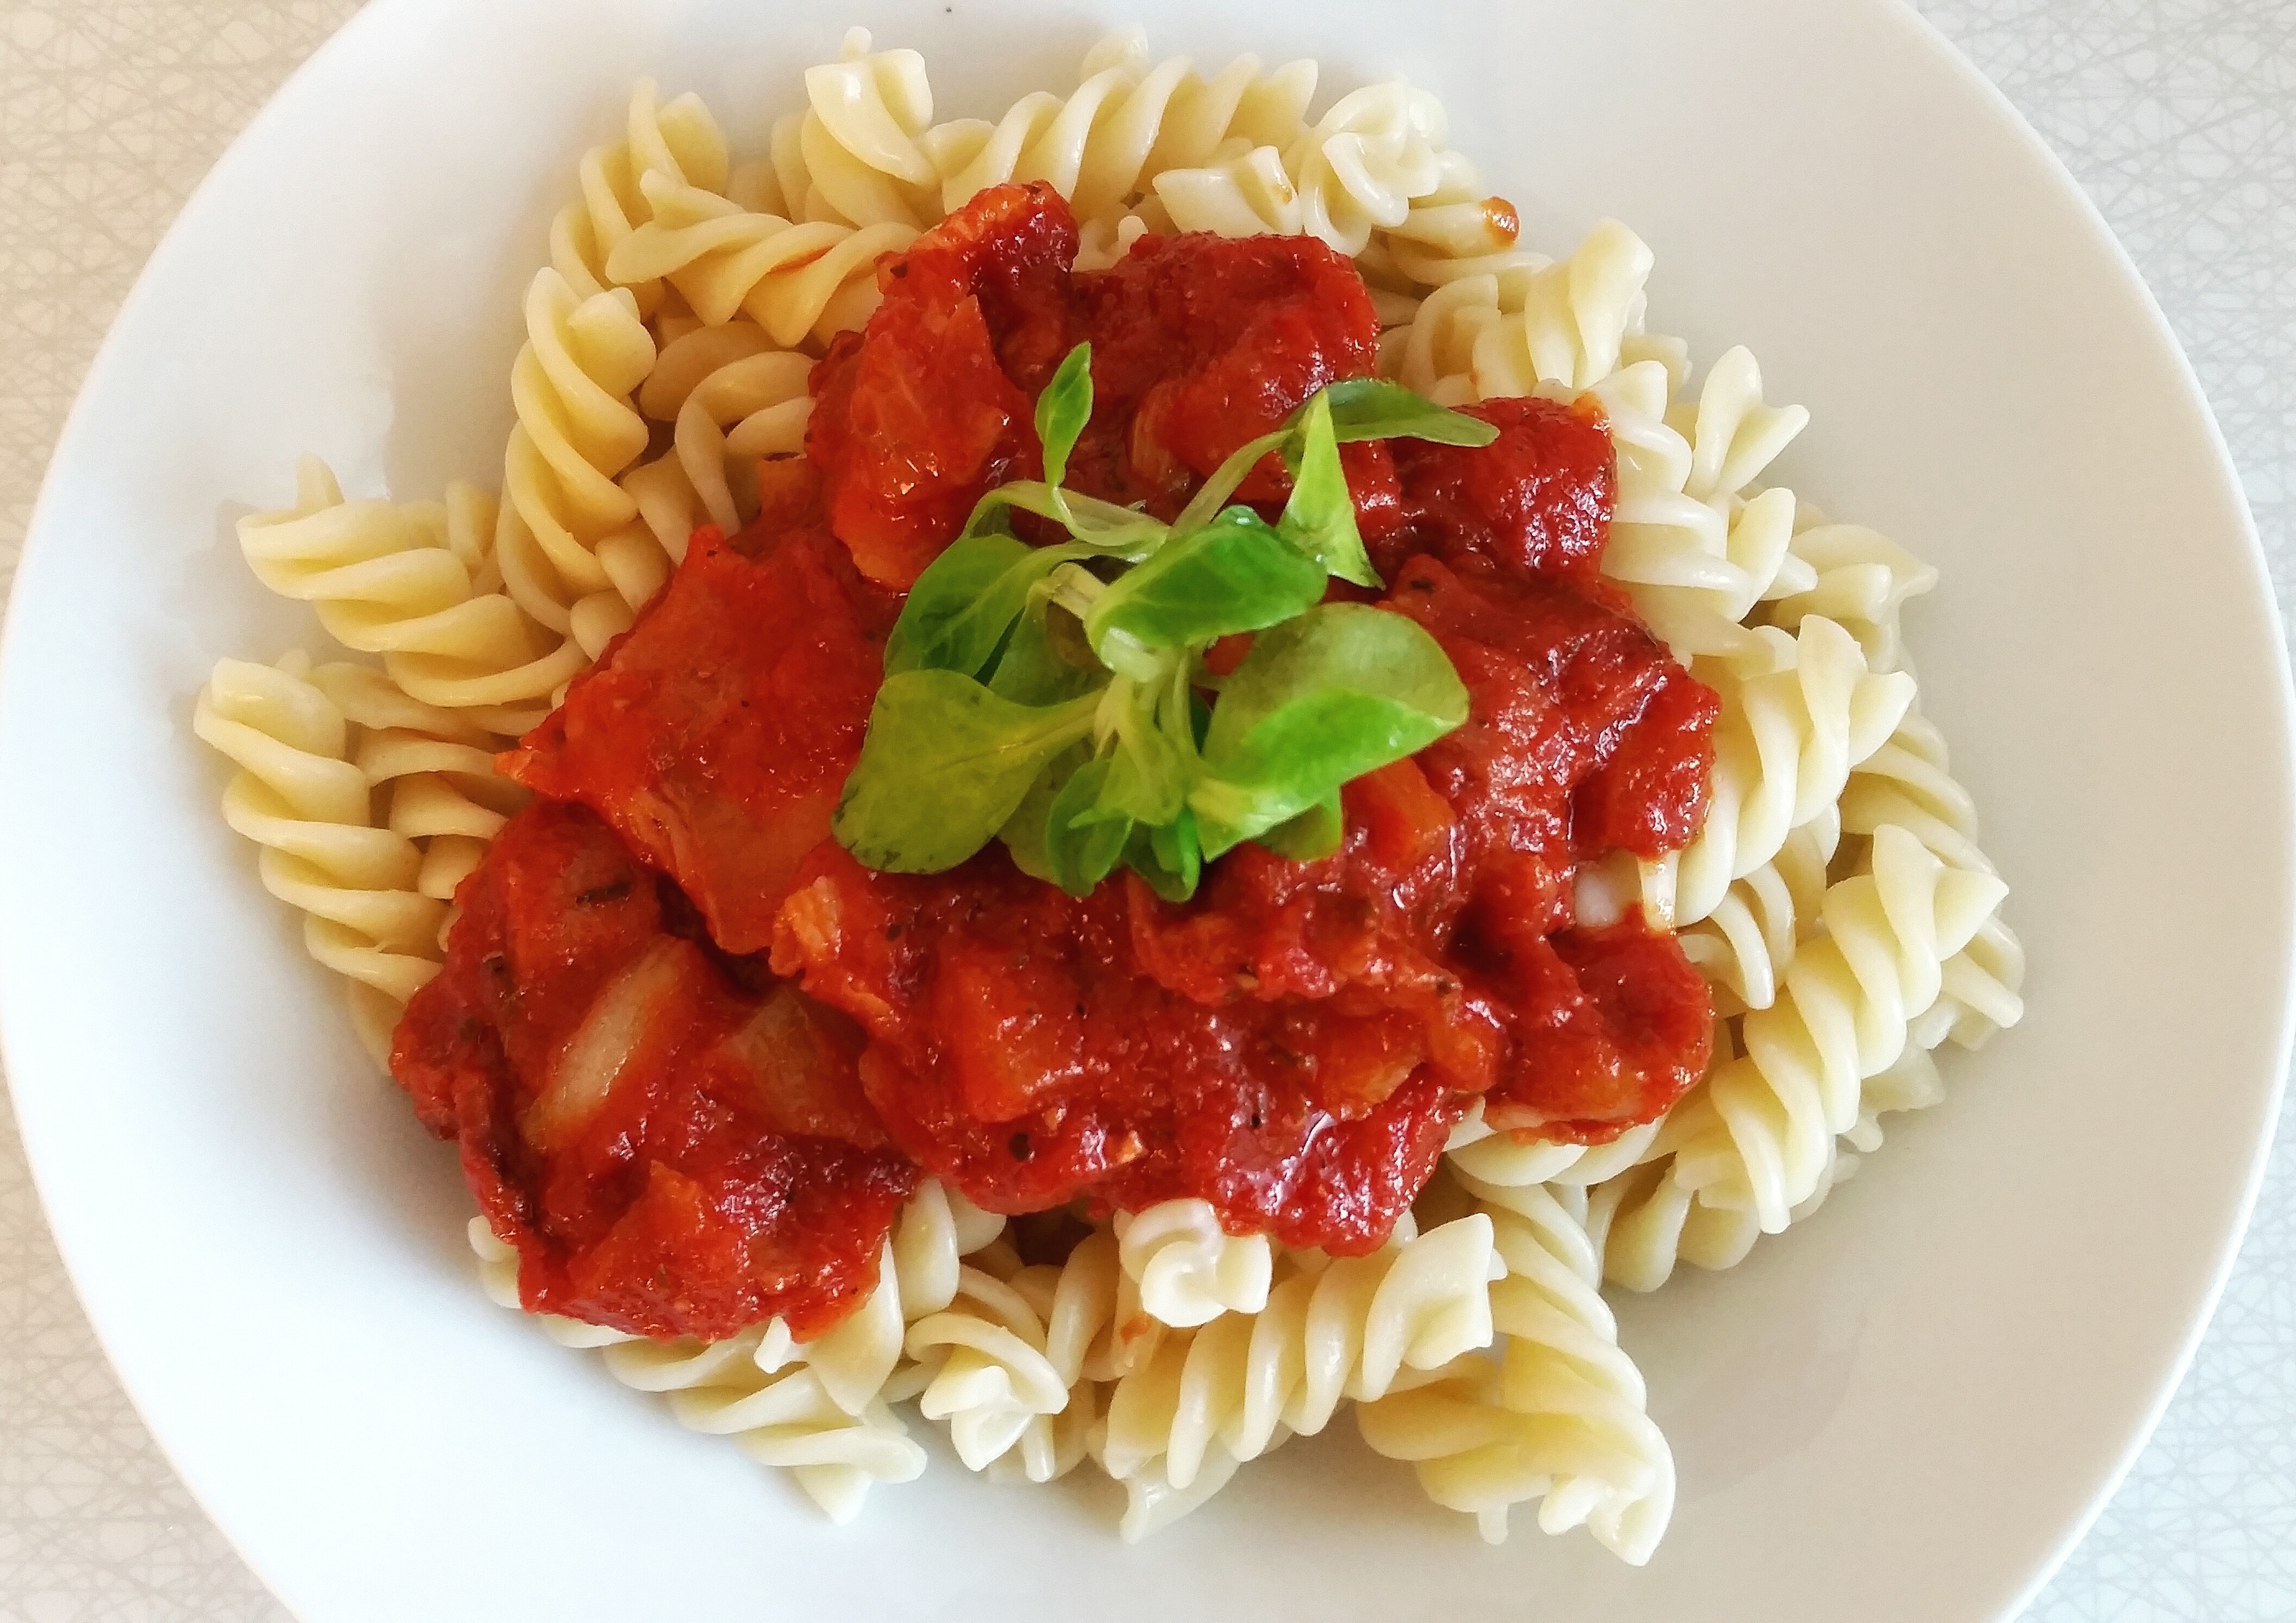 Learn why Italian food is so healthy and check out a fresh tomato sauce recipe!